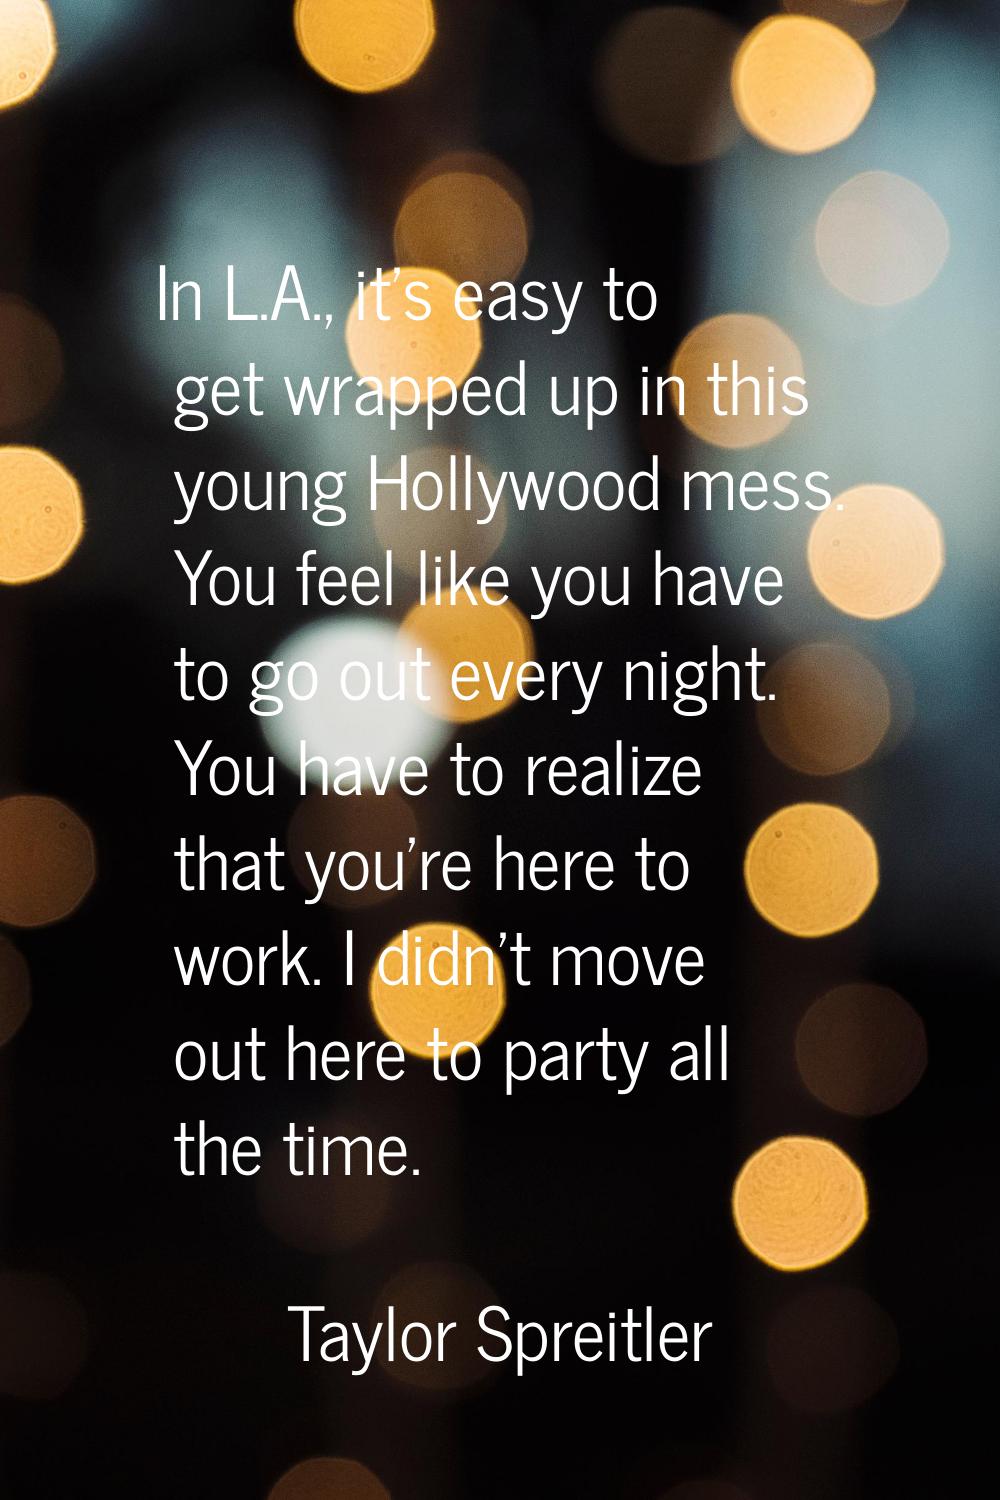 In L.A., it's easy to get wrapped up in this young Hollywood mess. You feel like you have to go out